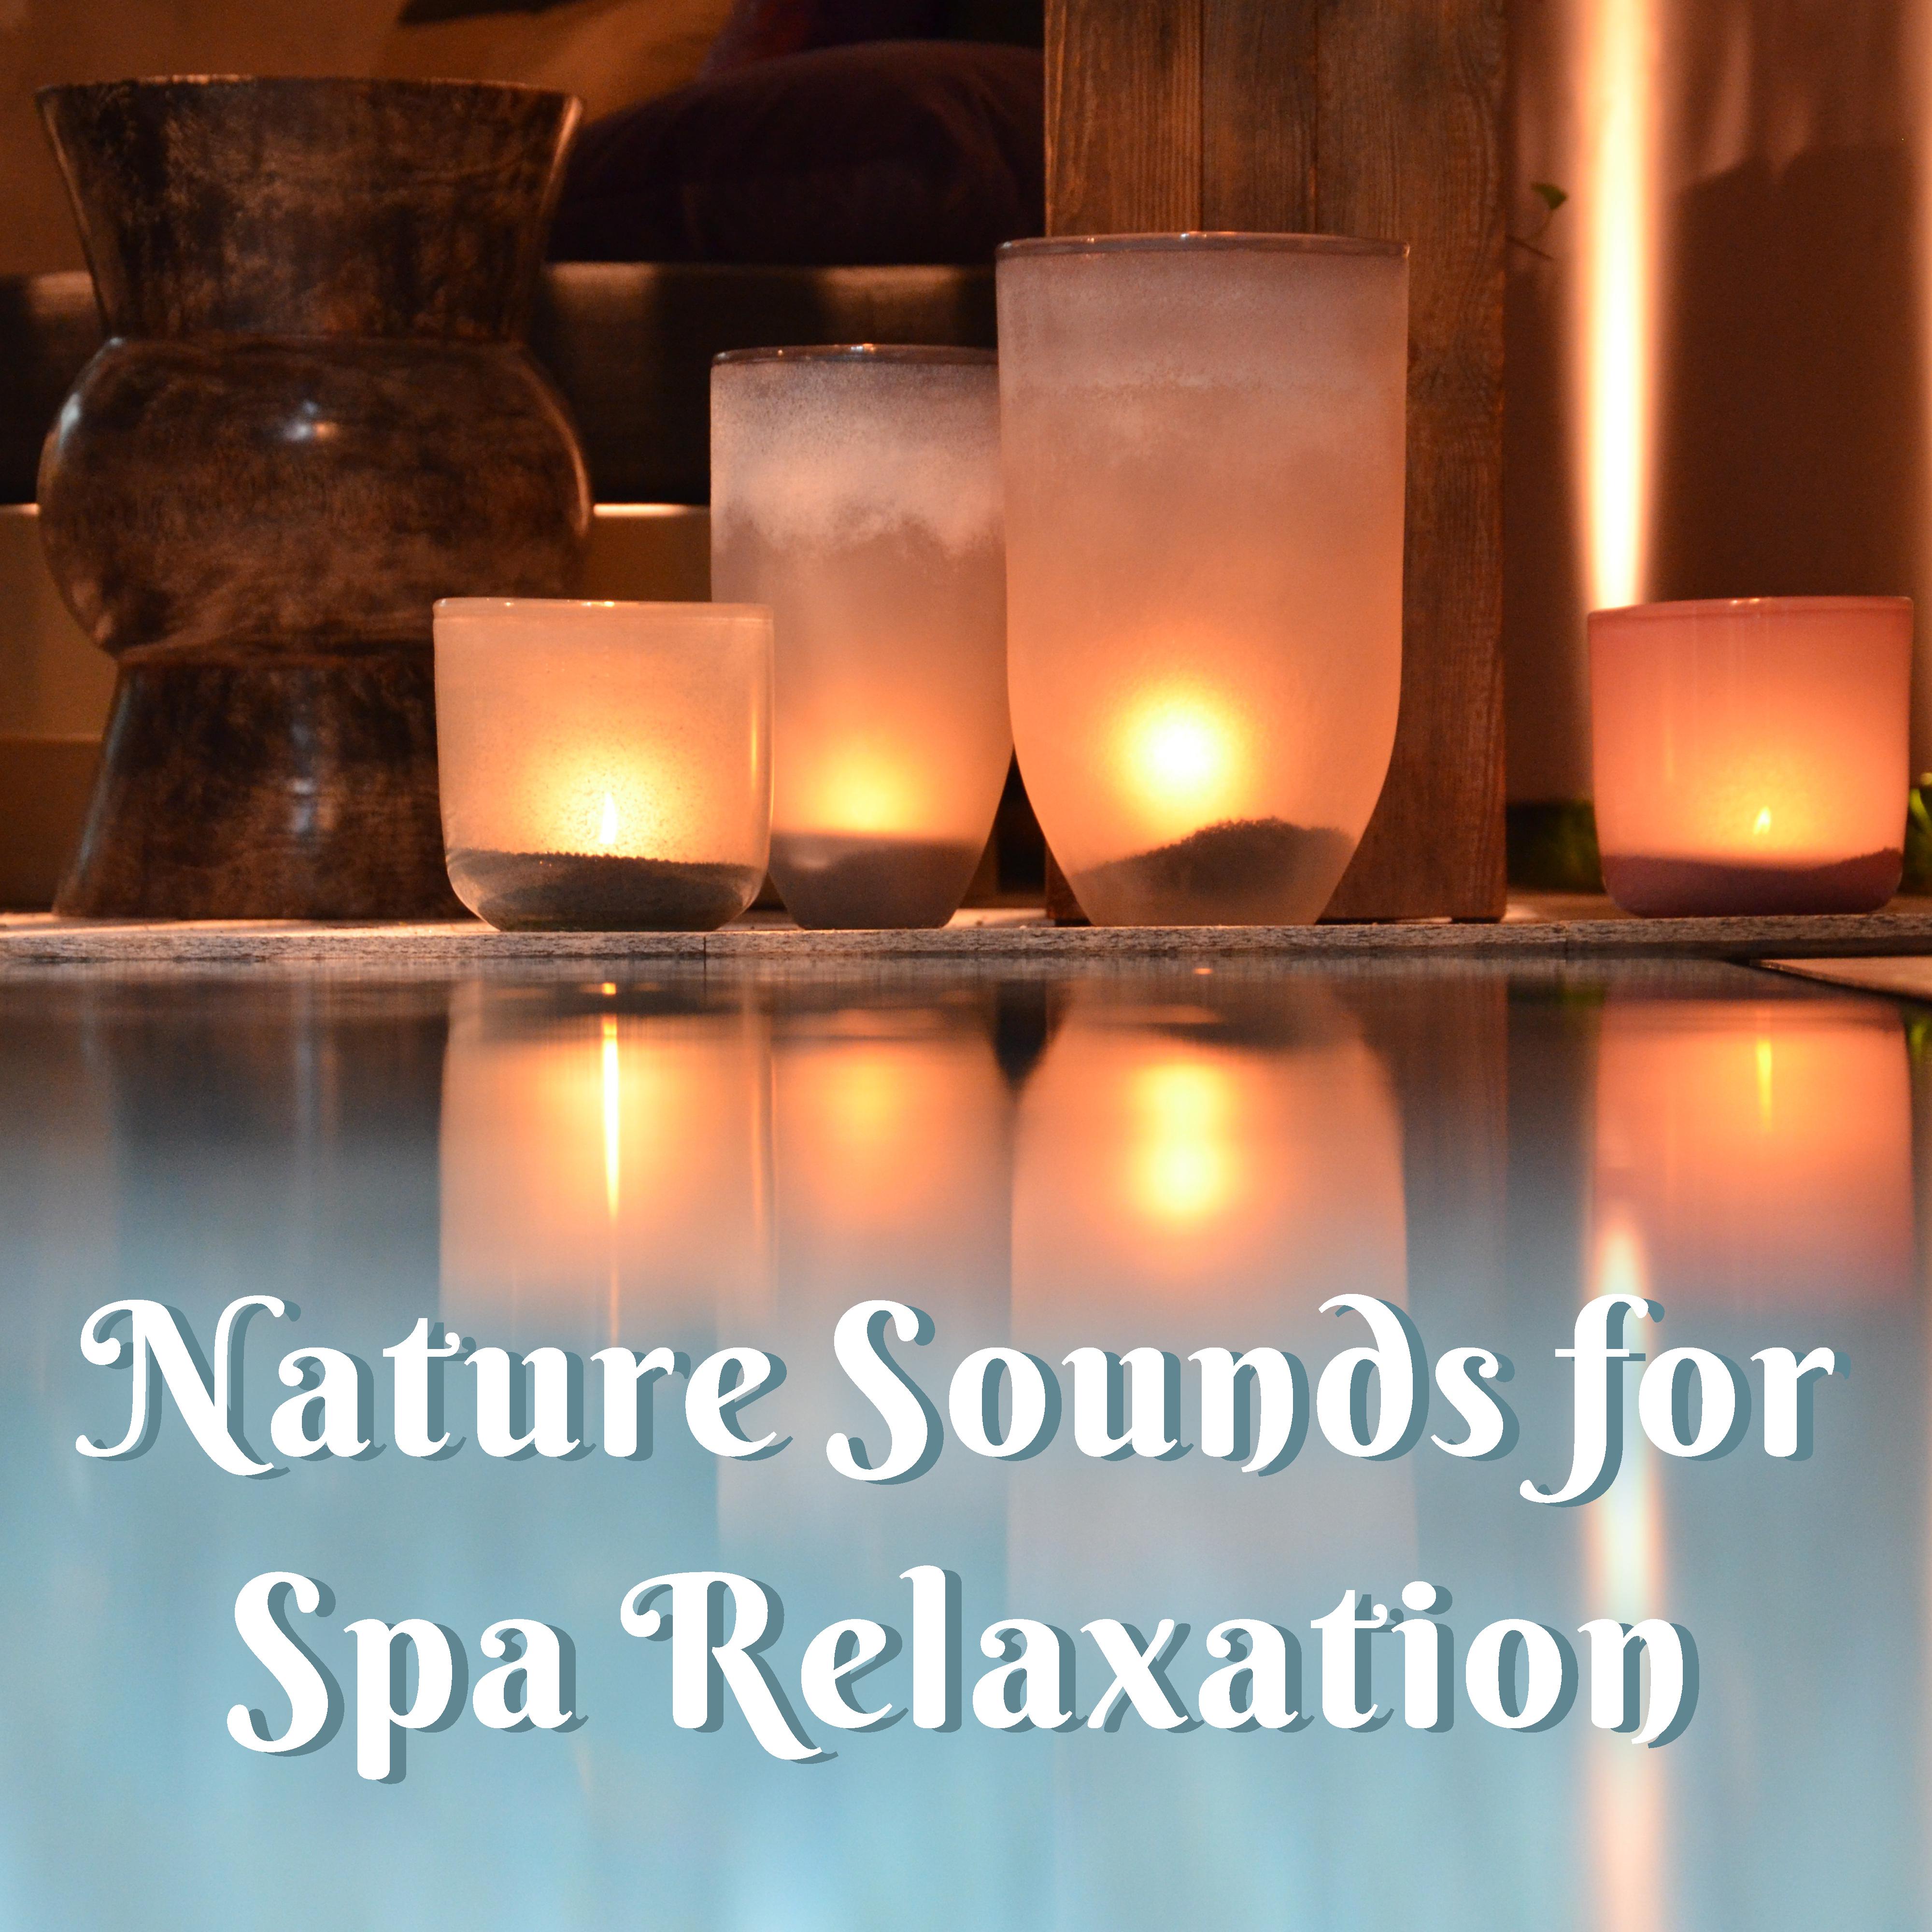 Nature Sounds for Spa Relaxation  Easy Listening, Stress Relief, Spa Beautiful Memories, Soothing Waves